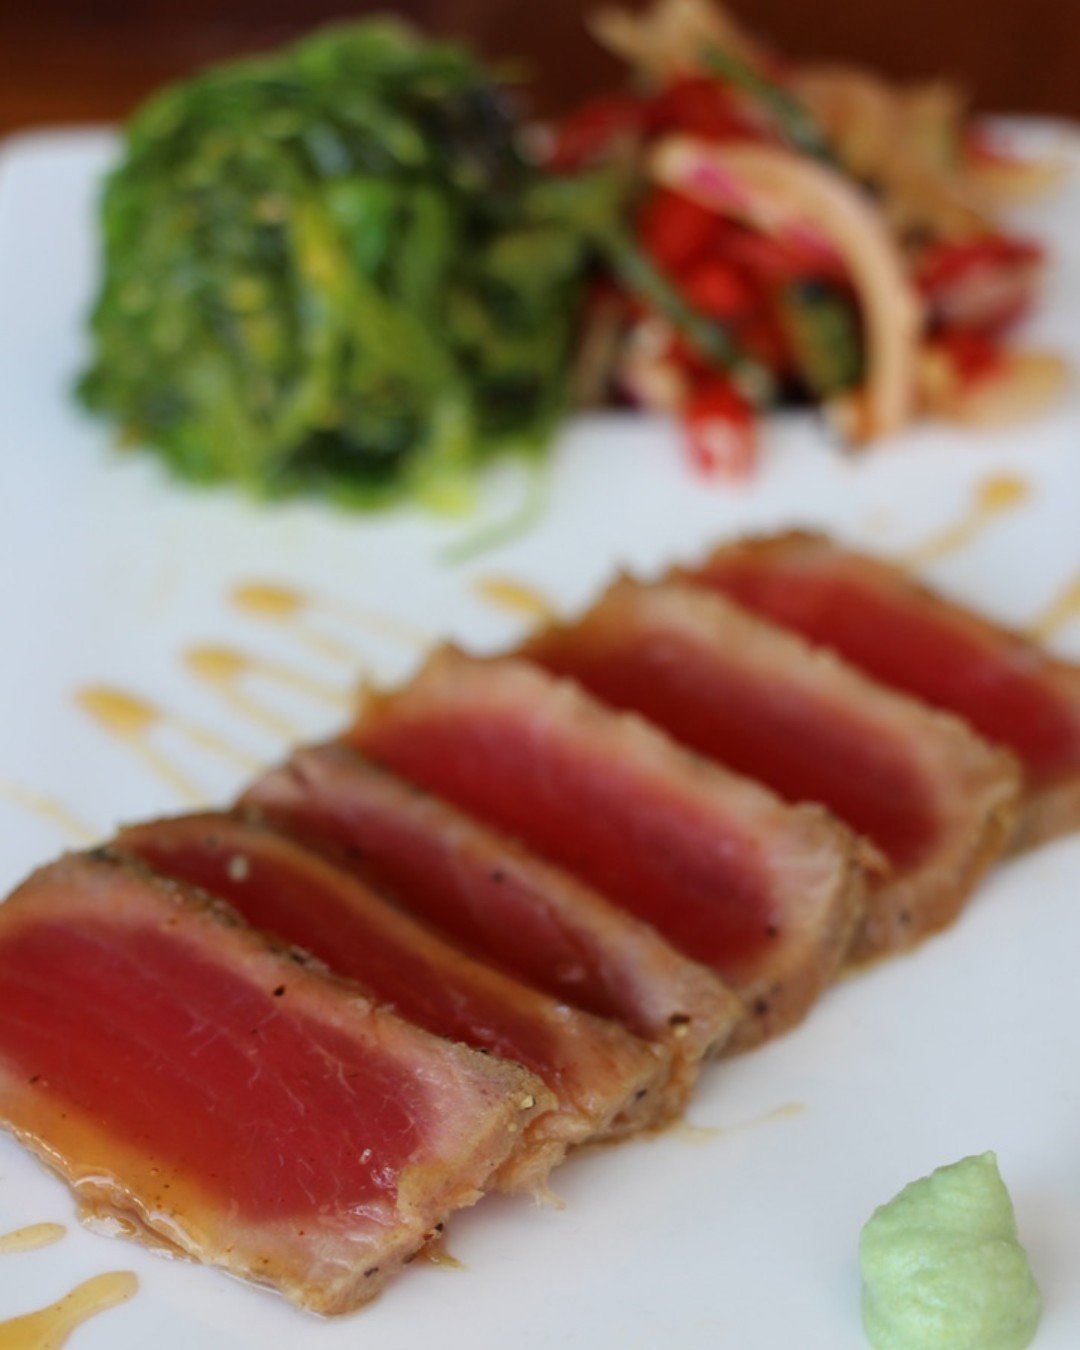 A taste of the ocean to your plate with this perfectly seared Ahi Tuna topped with a flavorful pepper and garlic crust, paired with a refreshing marinated cucumber salad and drizzled in a tangy soy-ginger glaze. And let's not forget about that delici